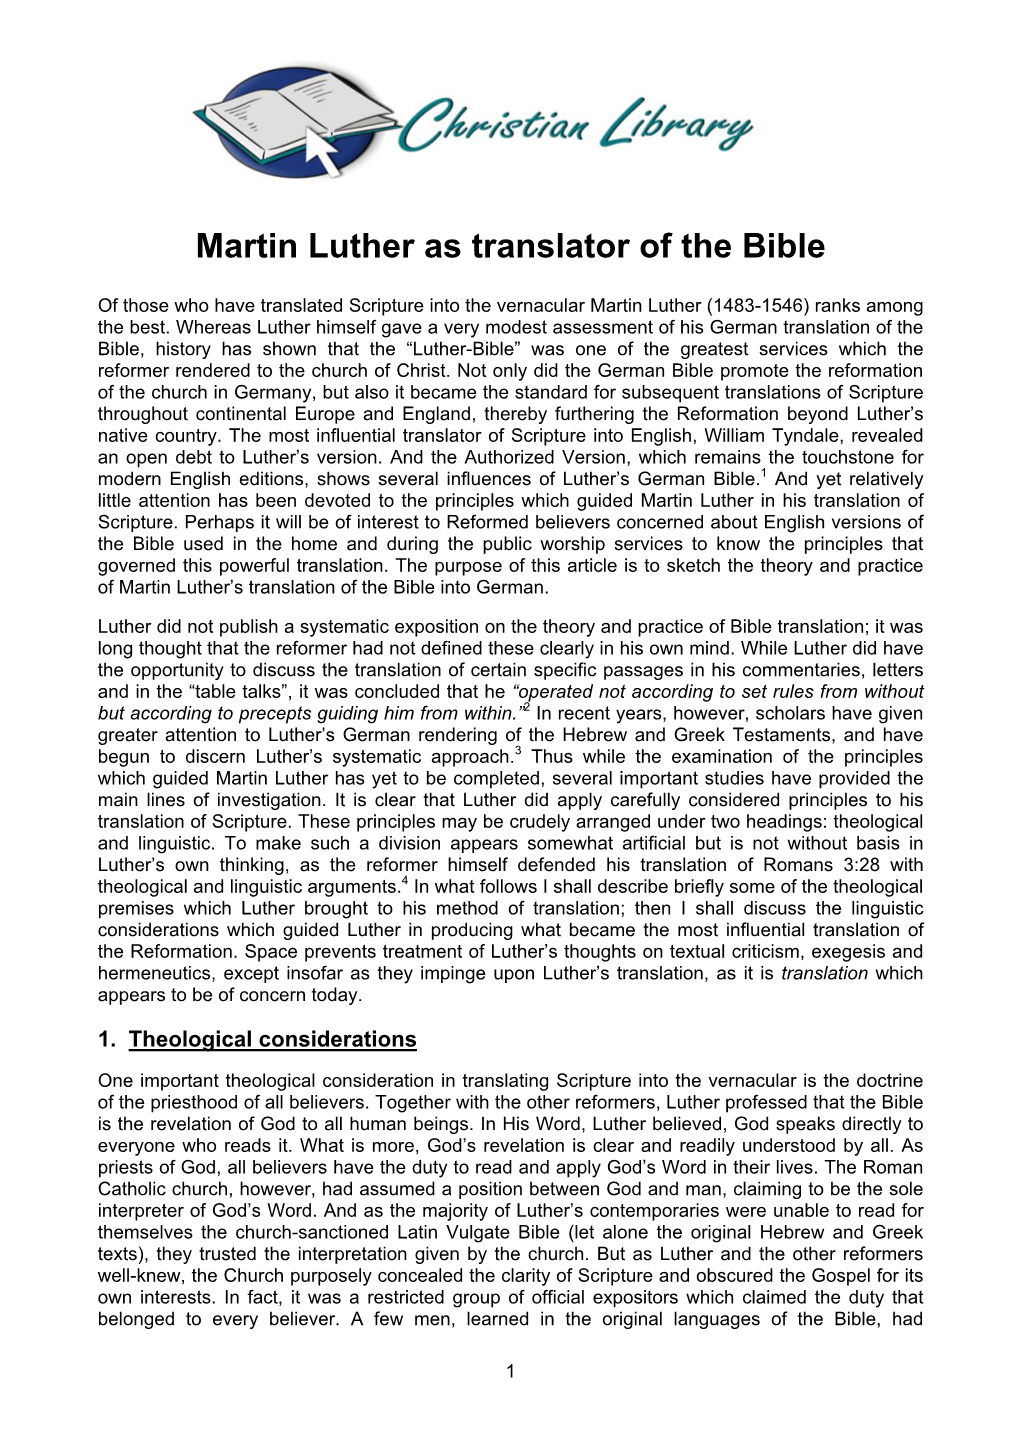 Martin Luther As Translator of the Bible